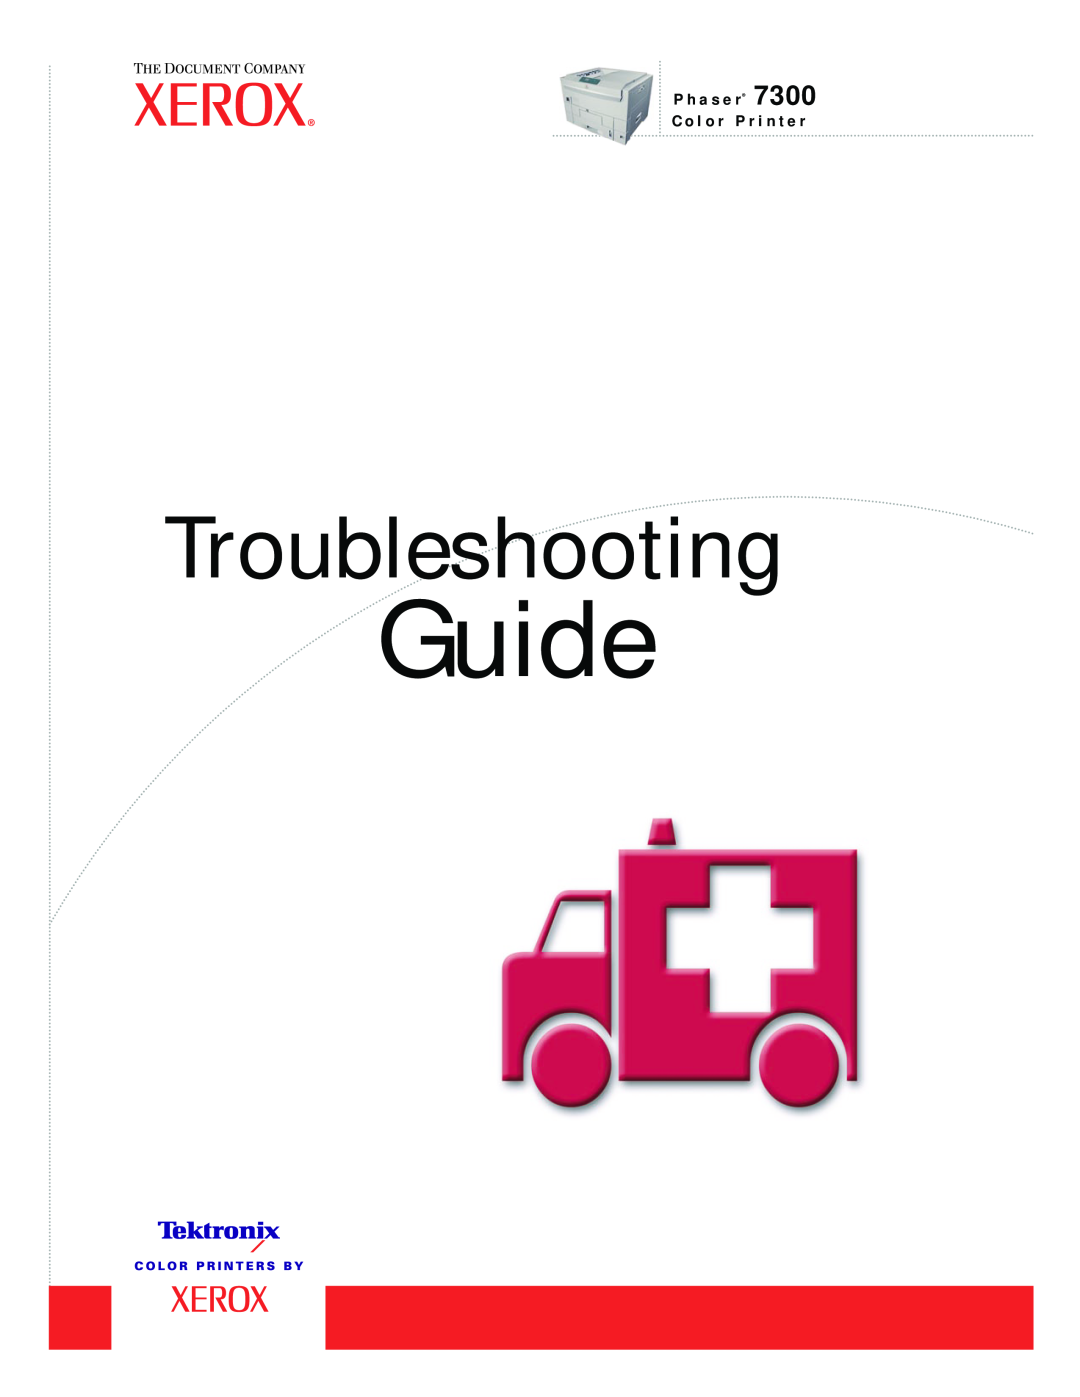 Xerox 7300 manual P h a s e r C o l o r P r i n t e r, Guide, Troubleshooting 